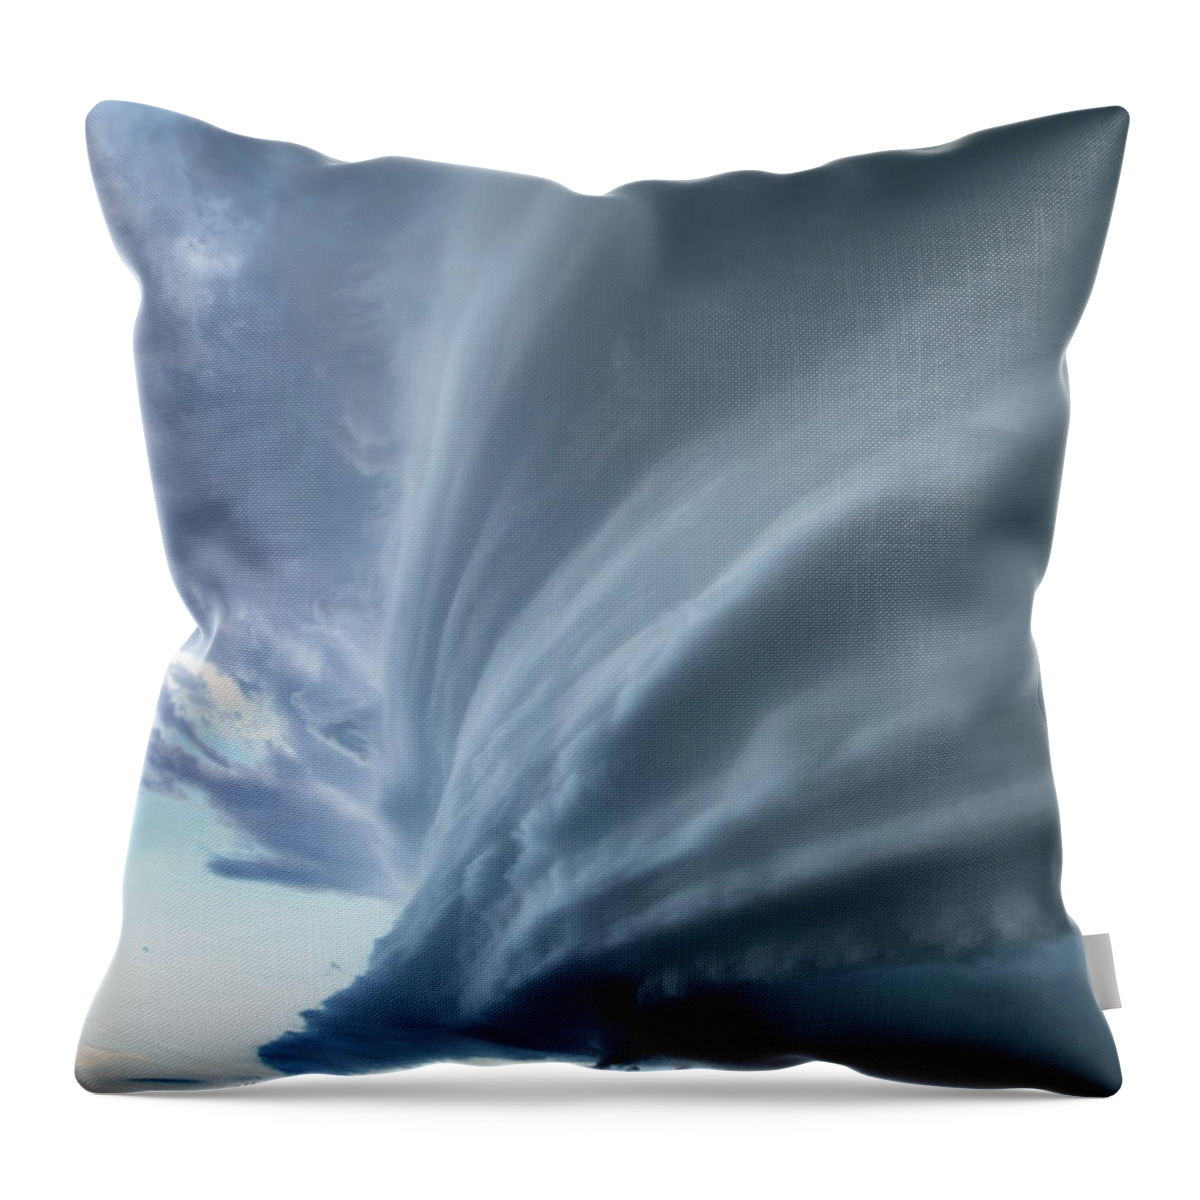 Mesocyclone Throw Pillow featuring the photograph Mesocyclone Vertical by Wesley Aston